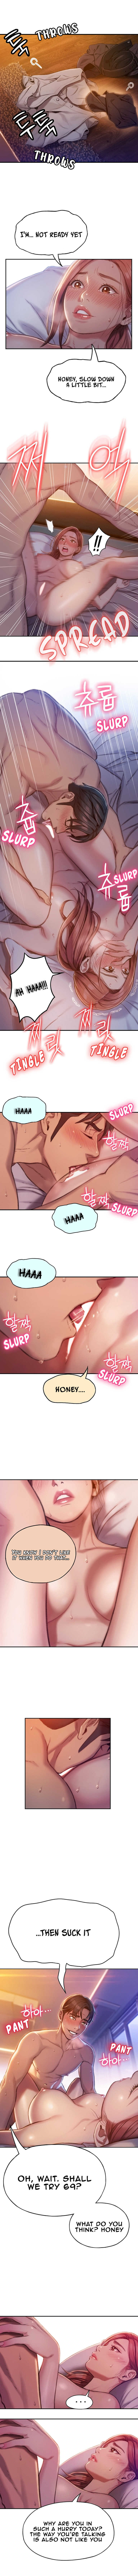 [Park Hyeongjun] Love Limit Exceeded (01-09) (Ongoing) - Page 39